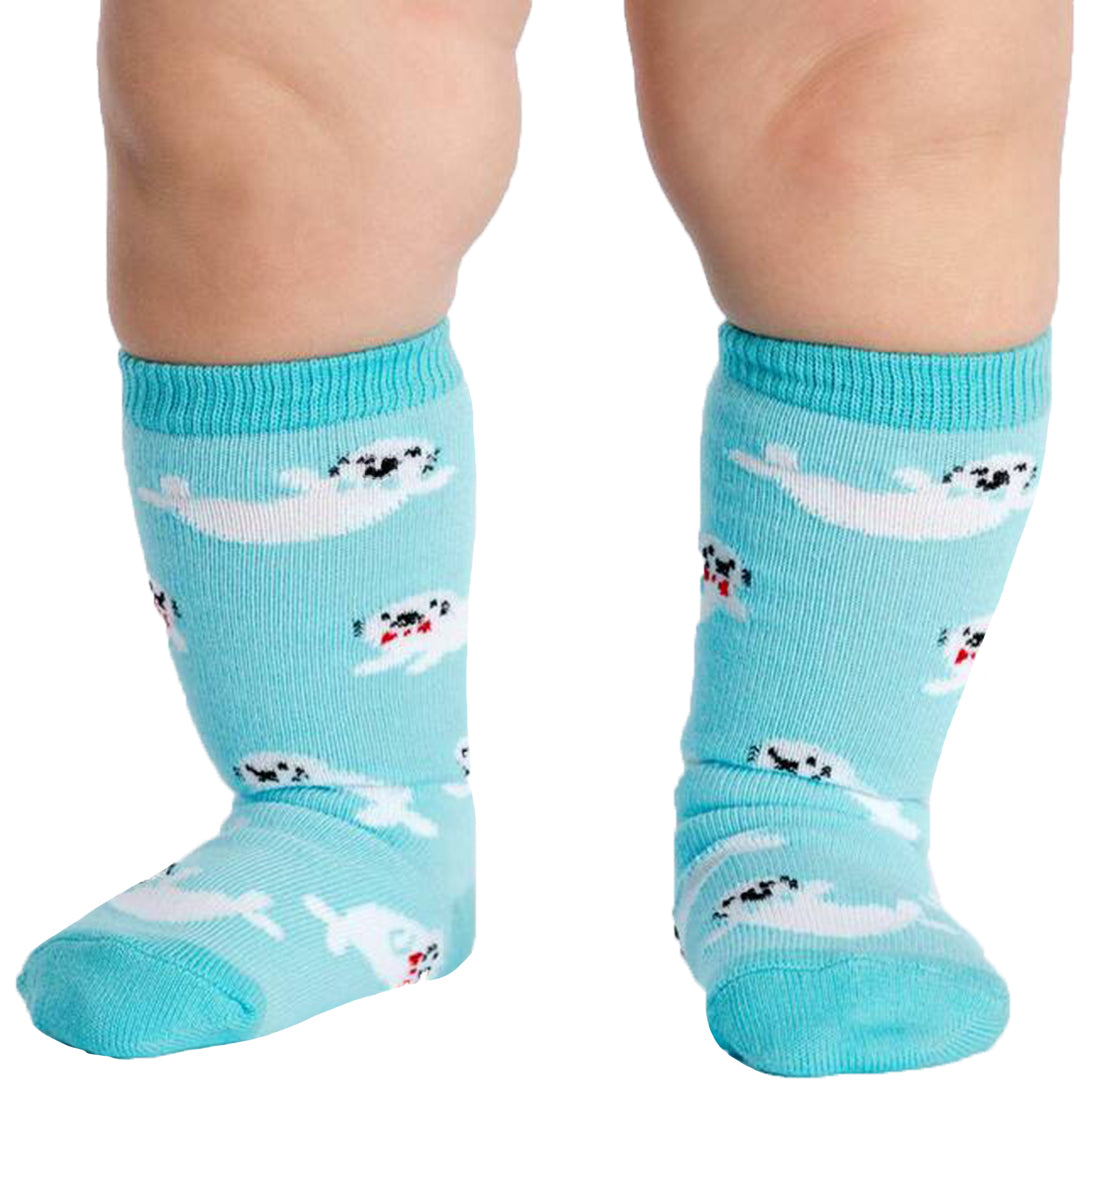 SOCK it to me Toddler Knee High Socks (tk0003),Baby Seals - Baby Seals,One Size